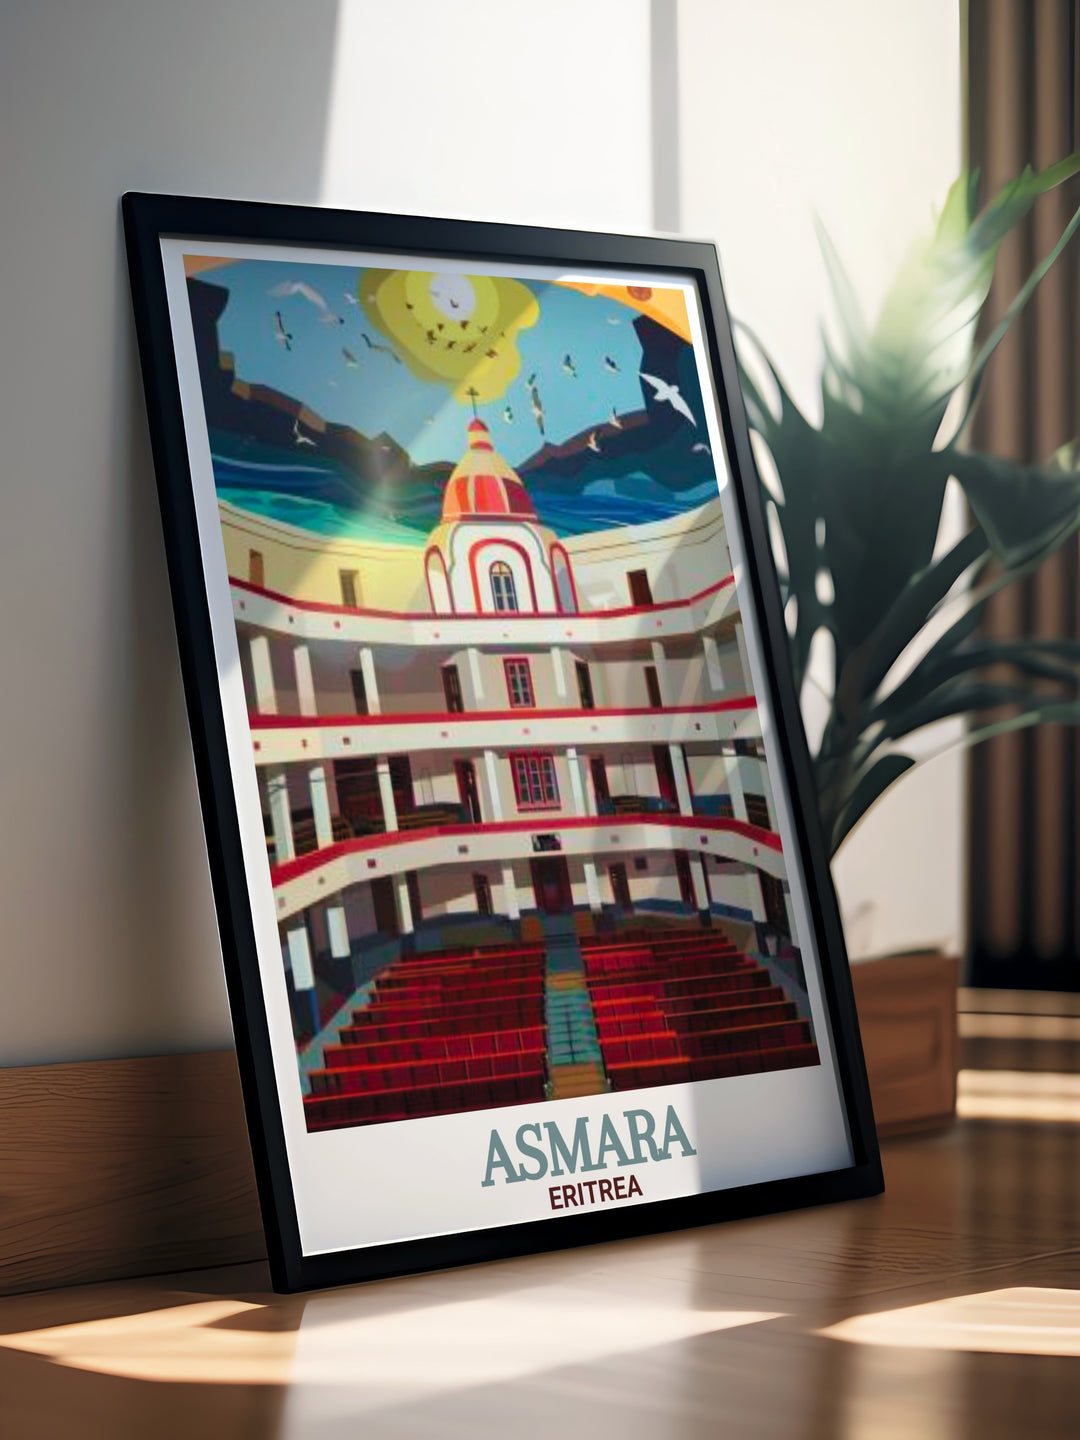 Detailed Asmara city map with Opera House highlighted, perfect for Asmara decor and personalized gifts, showcasing intricate city layout in vibrant hues.